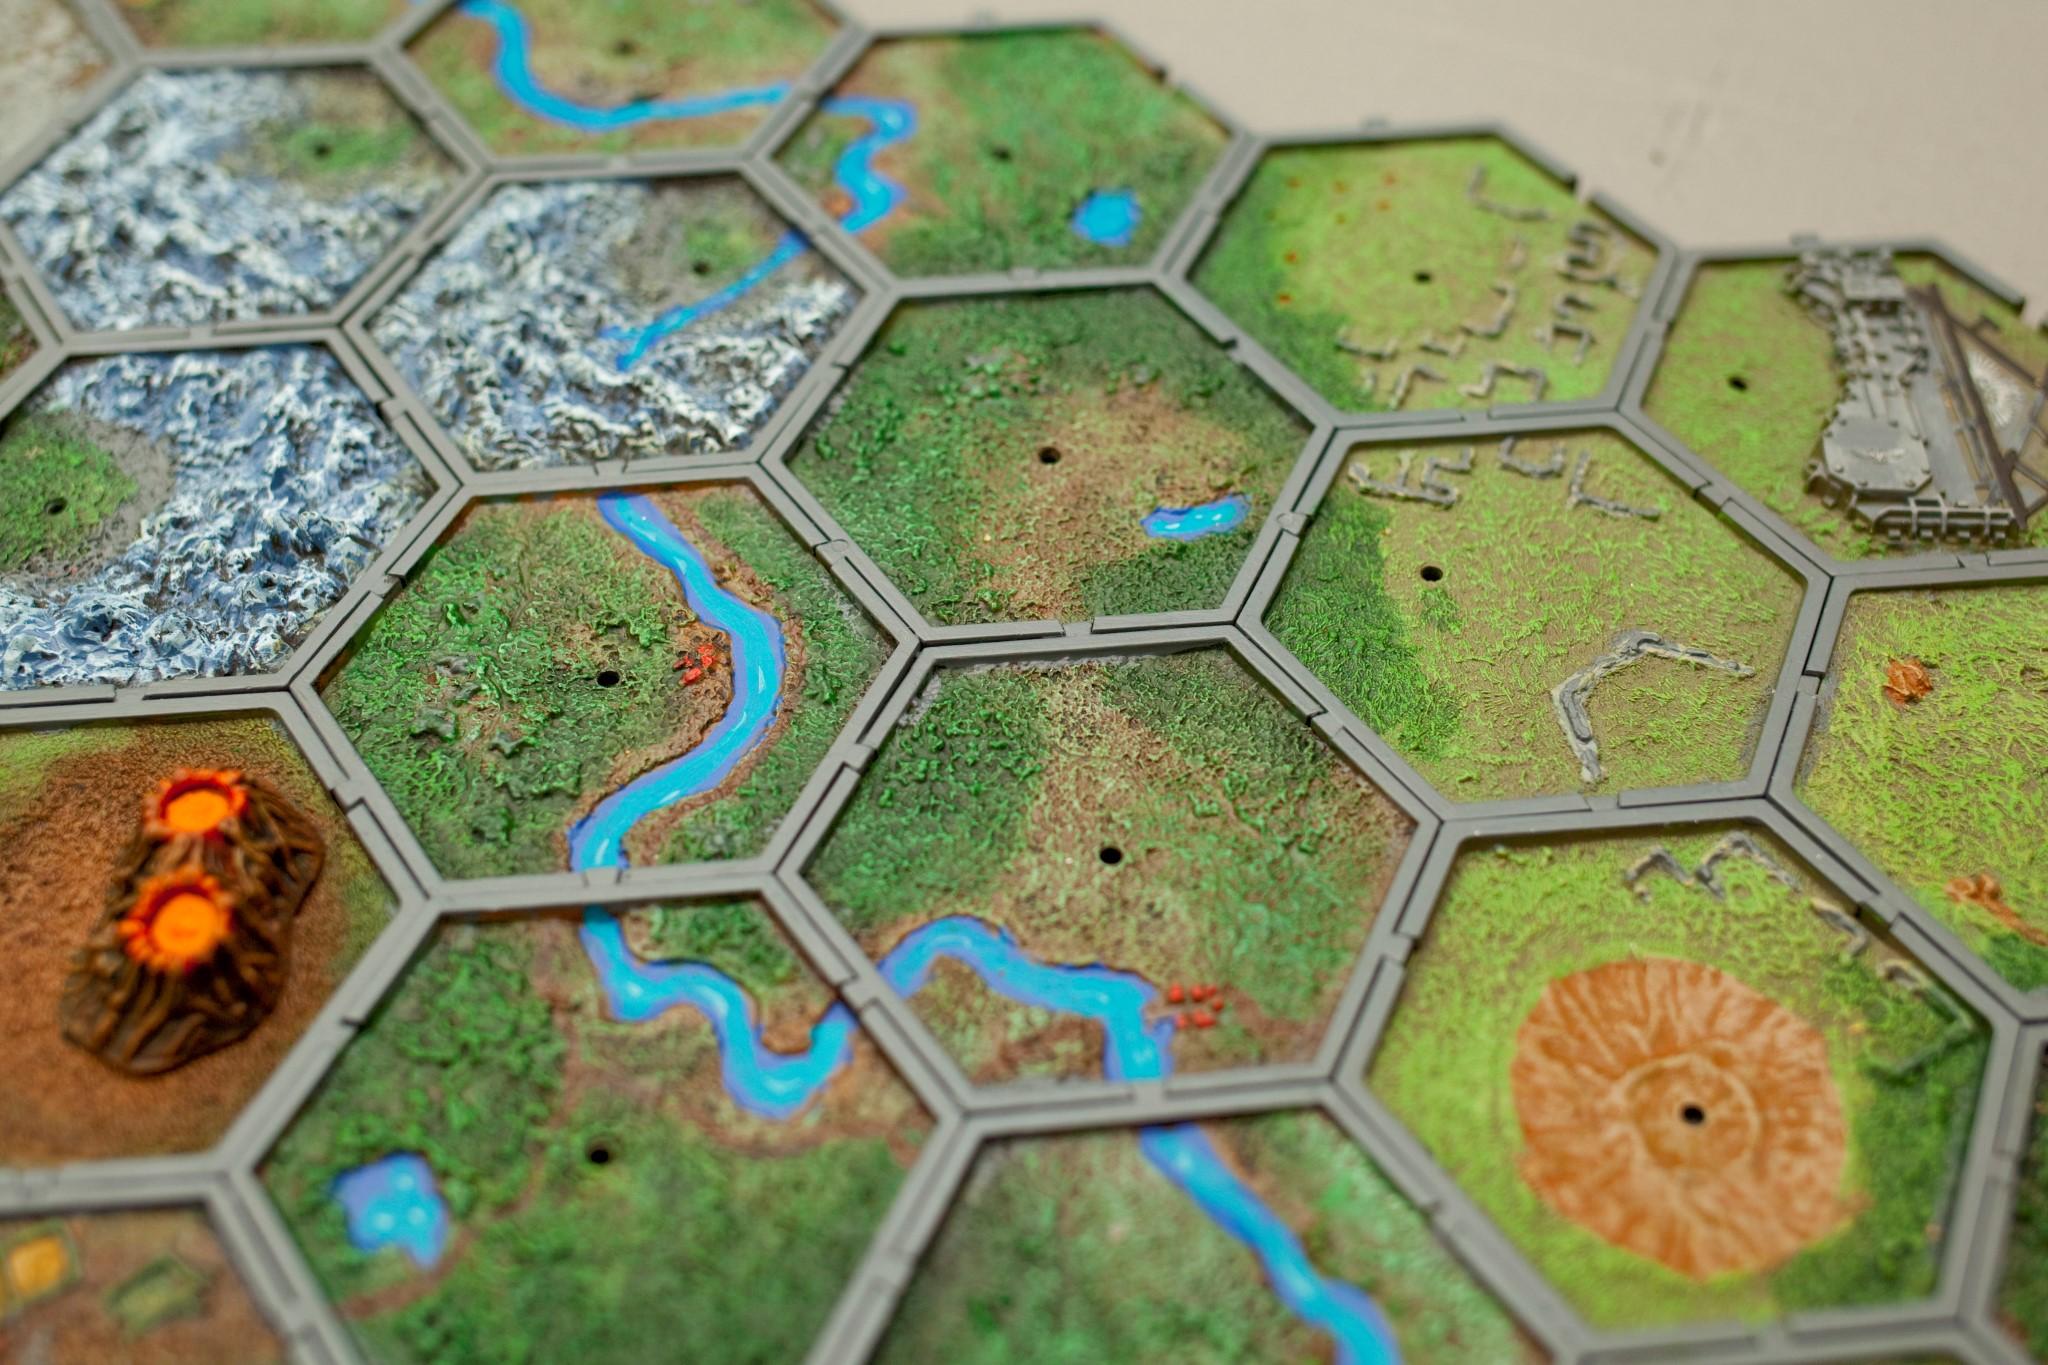 40k Campaign Map, Planetary Empires 40k Campaign Map, Planetary Empires Campaign Map, Planetary Empires Campaign Map 40k